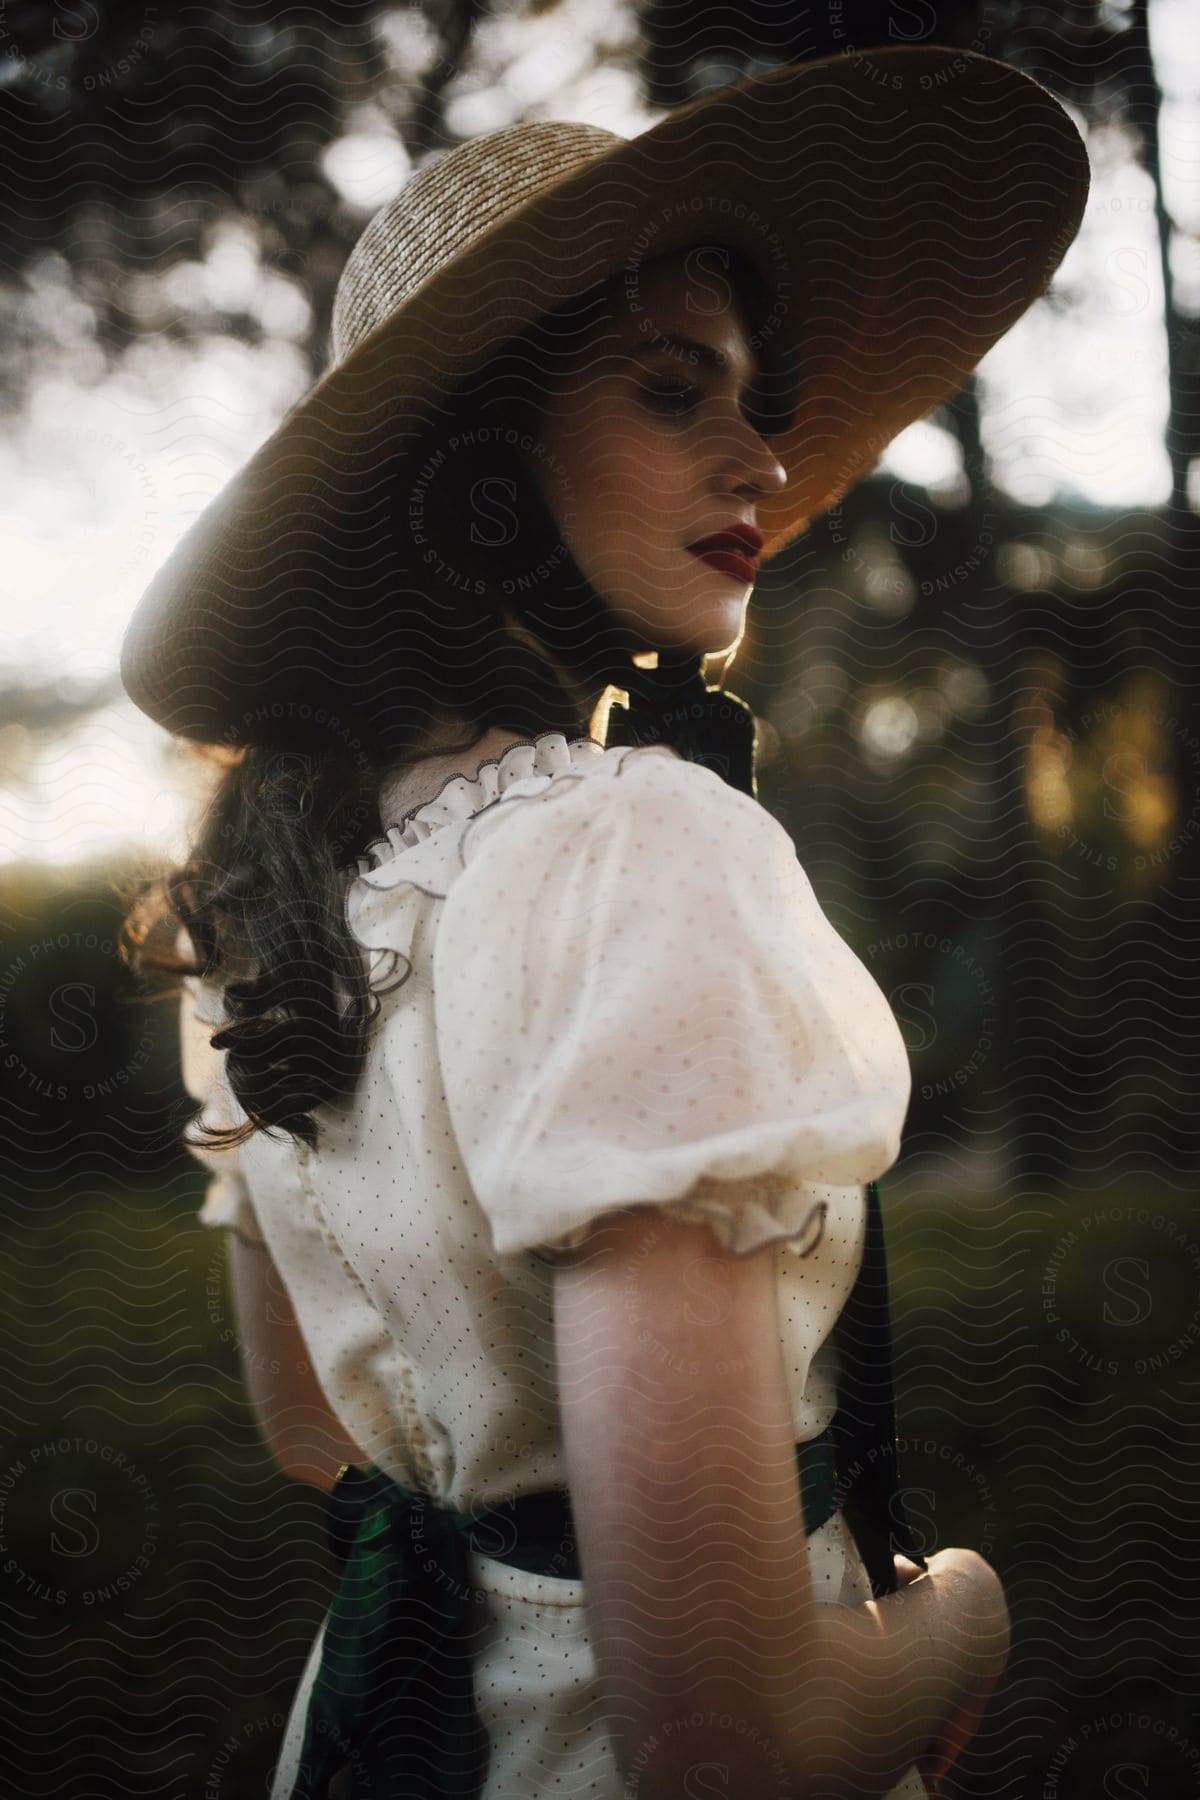 Woman in a white dress with green polka dots and sash wears a straw hat in the forest.